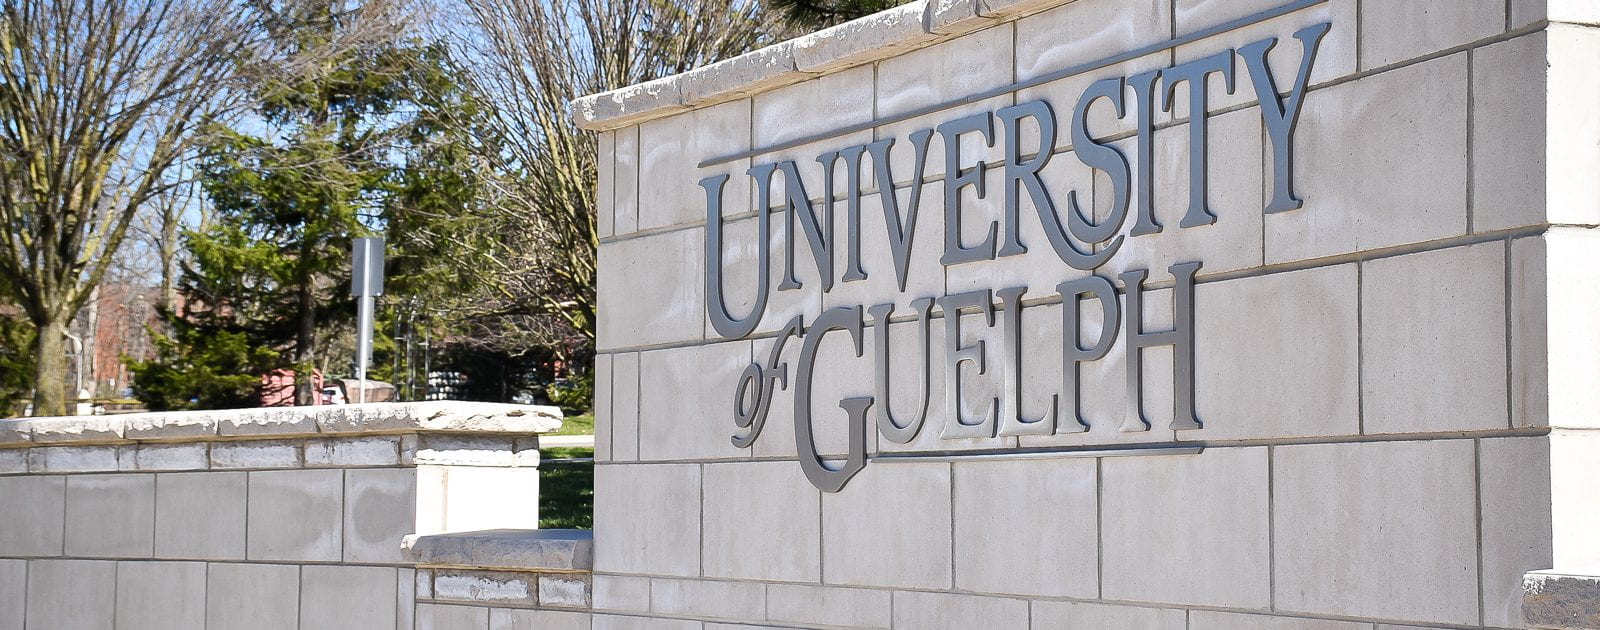 The University of Guelph logo is displayed on a stone wall in front of the campus.